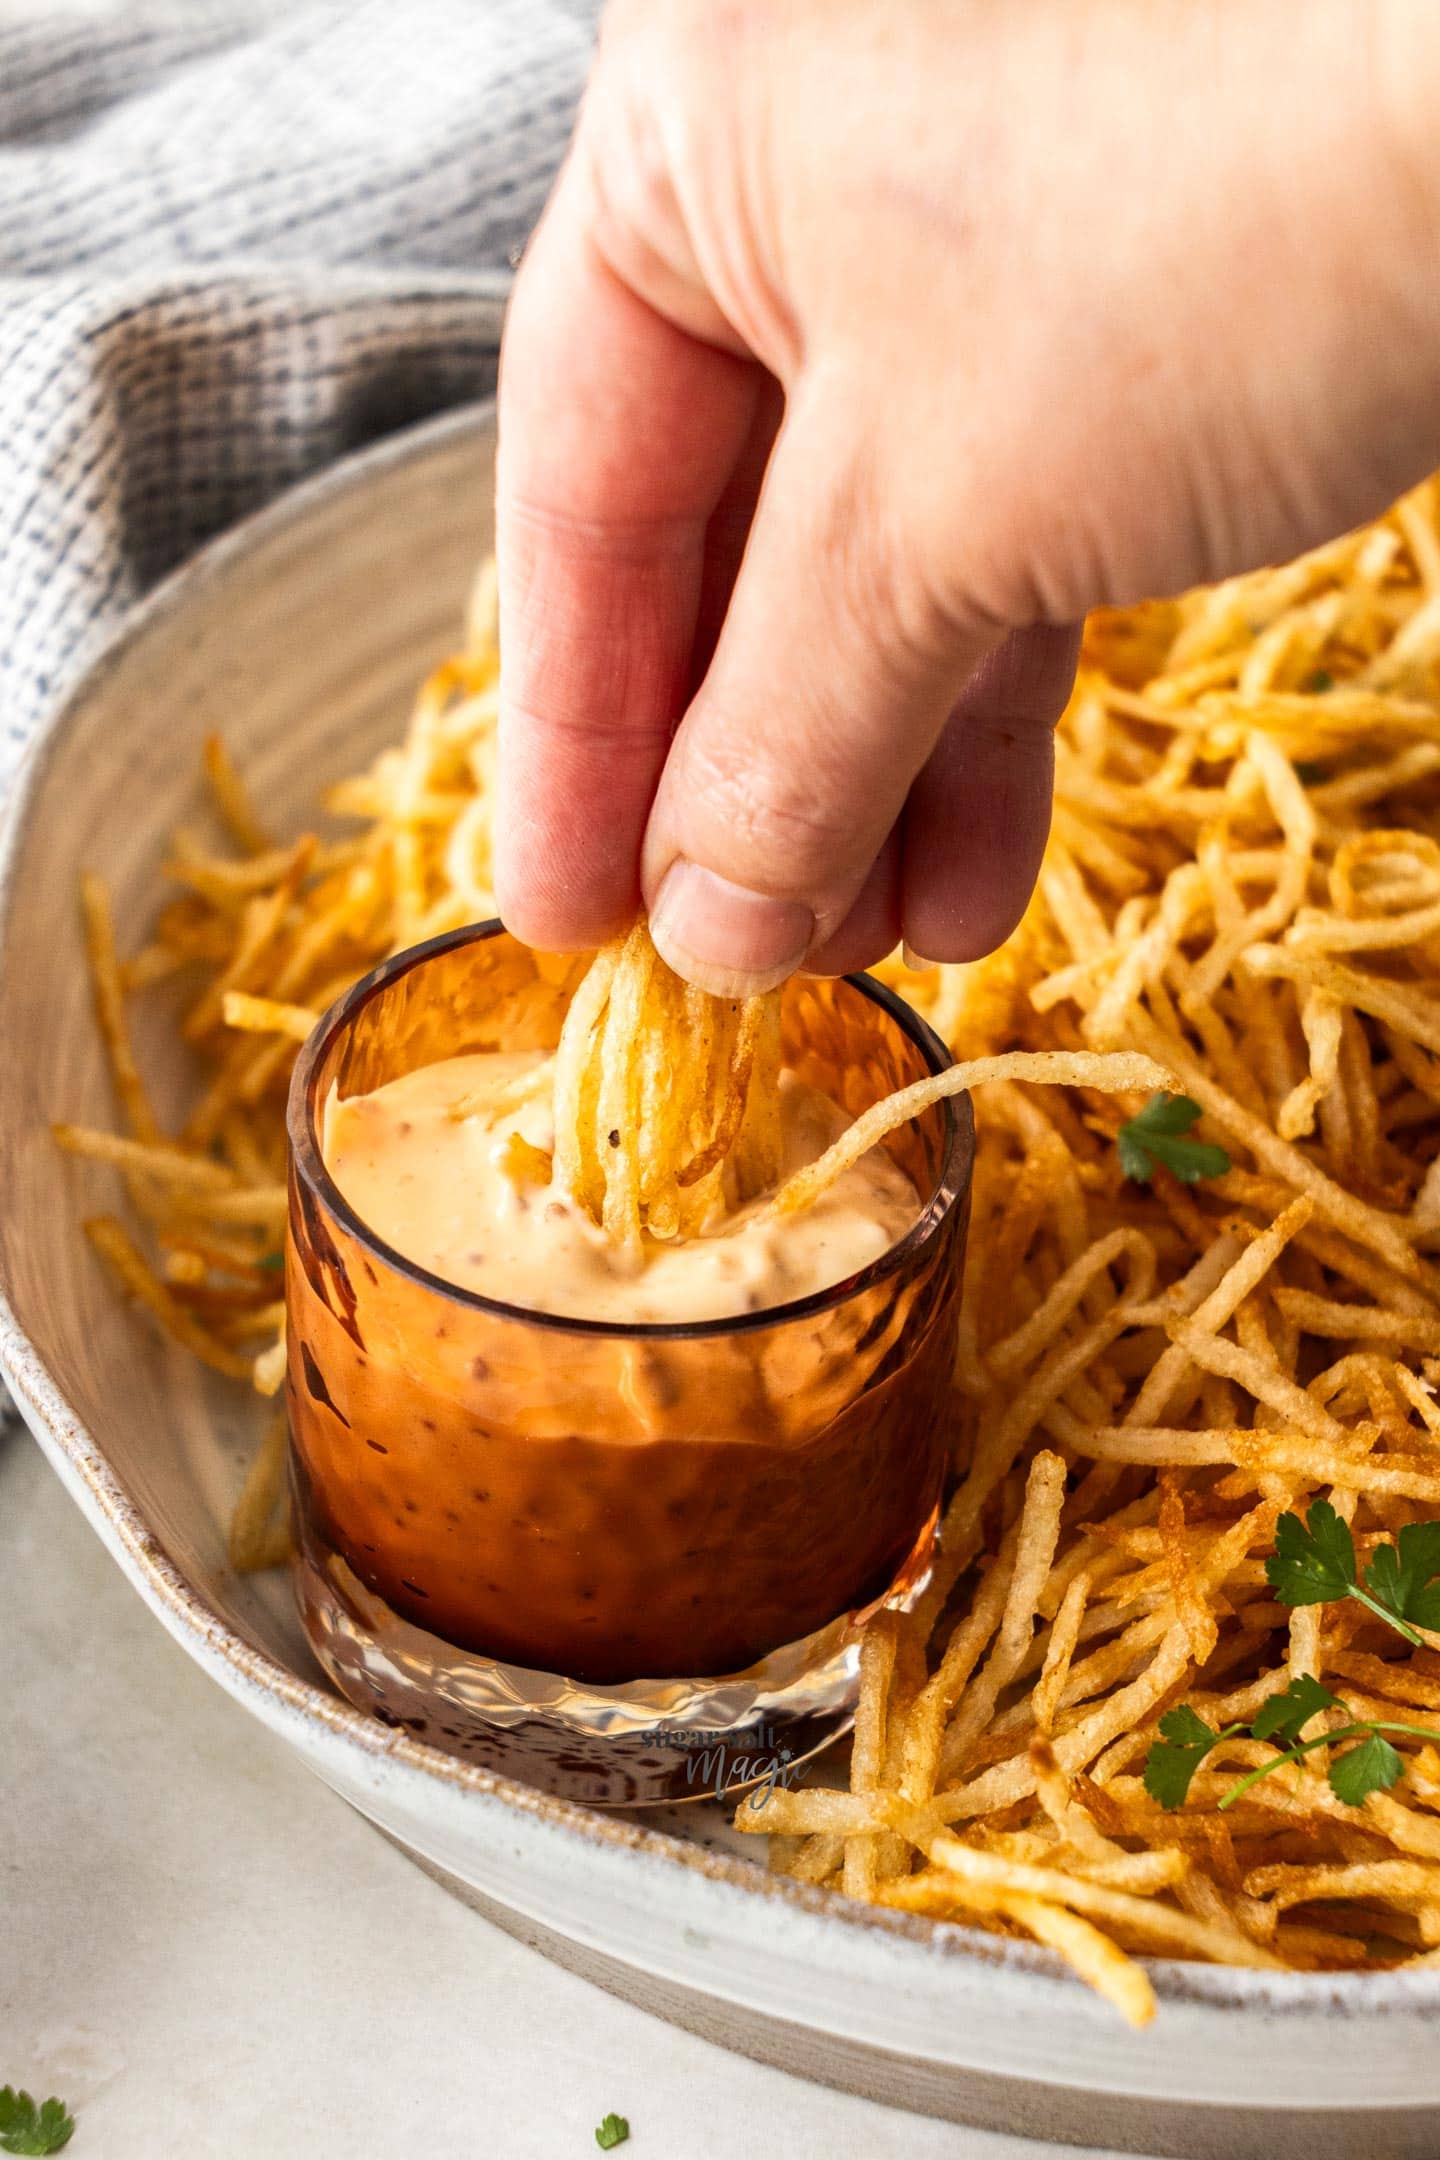 Dunking a handful of fries into sauce.